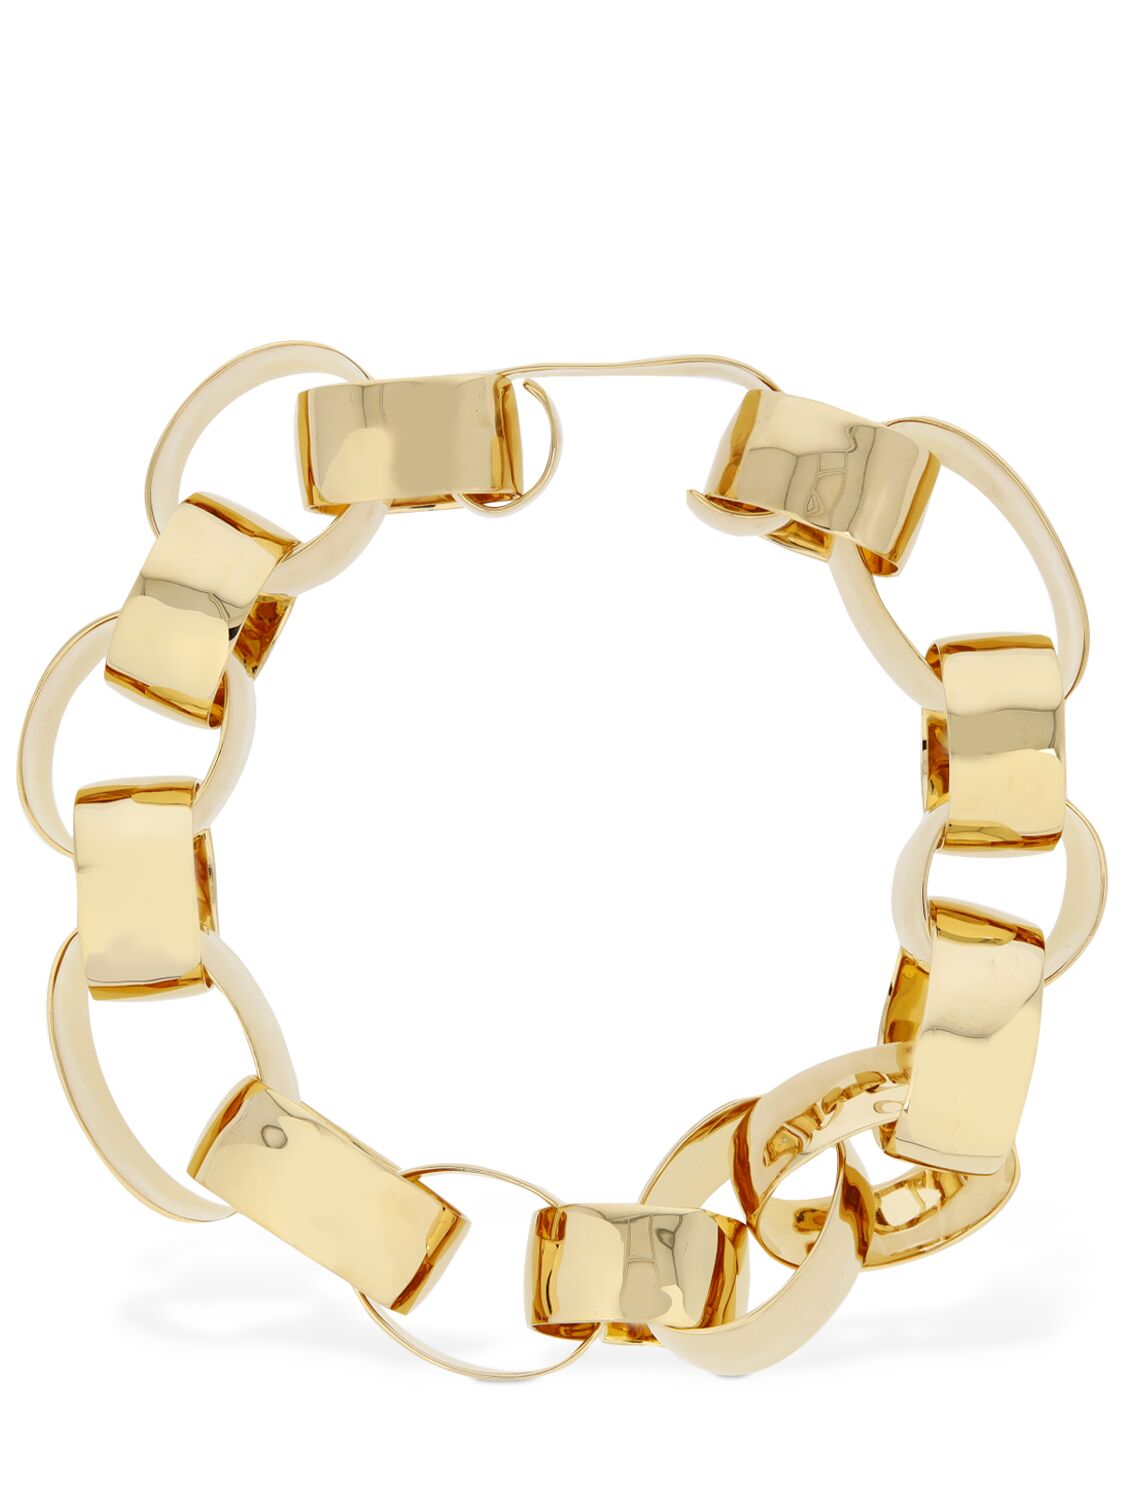 Jil Sander Raw Wildness 1 Collar Necklace In Gold